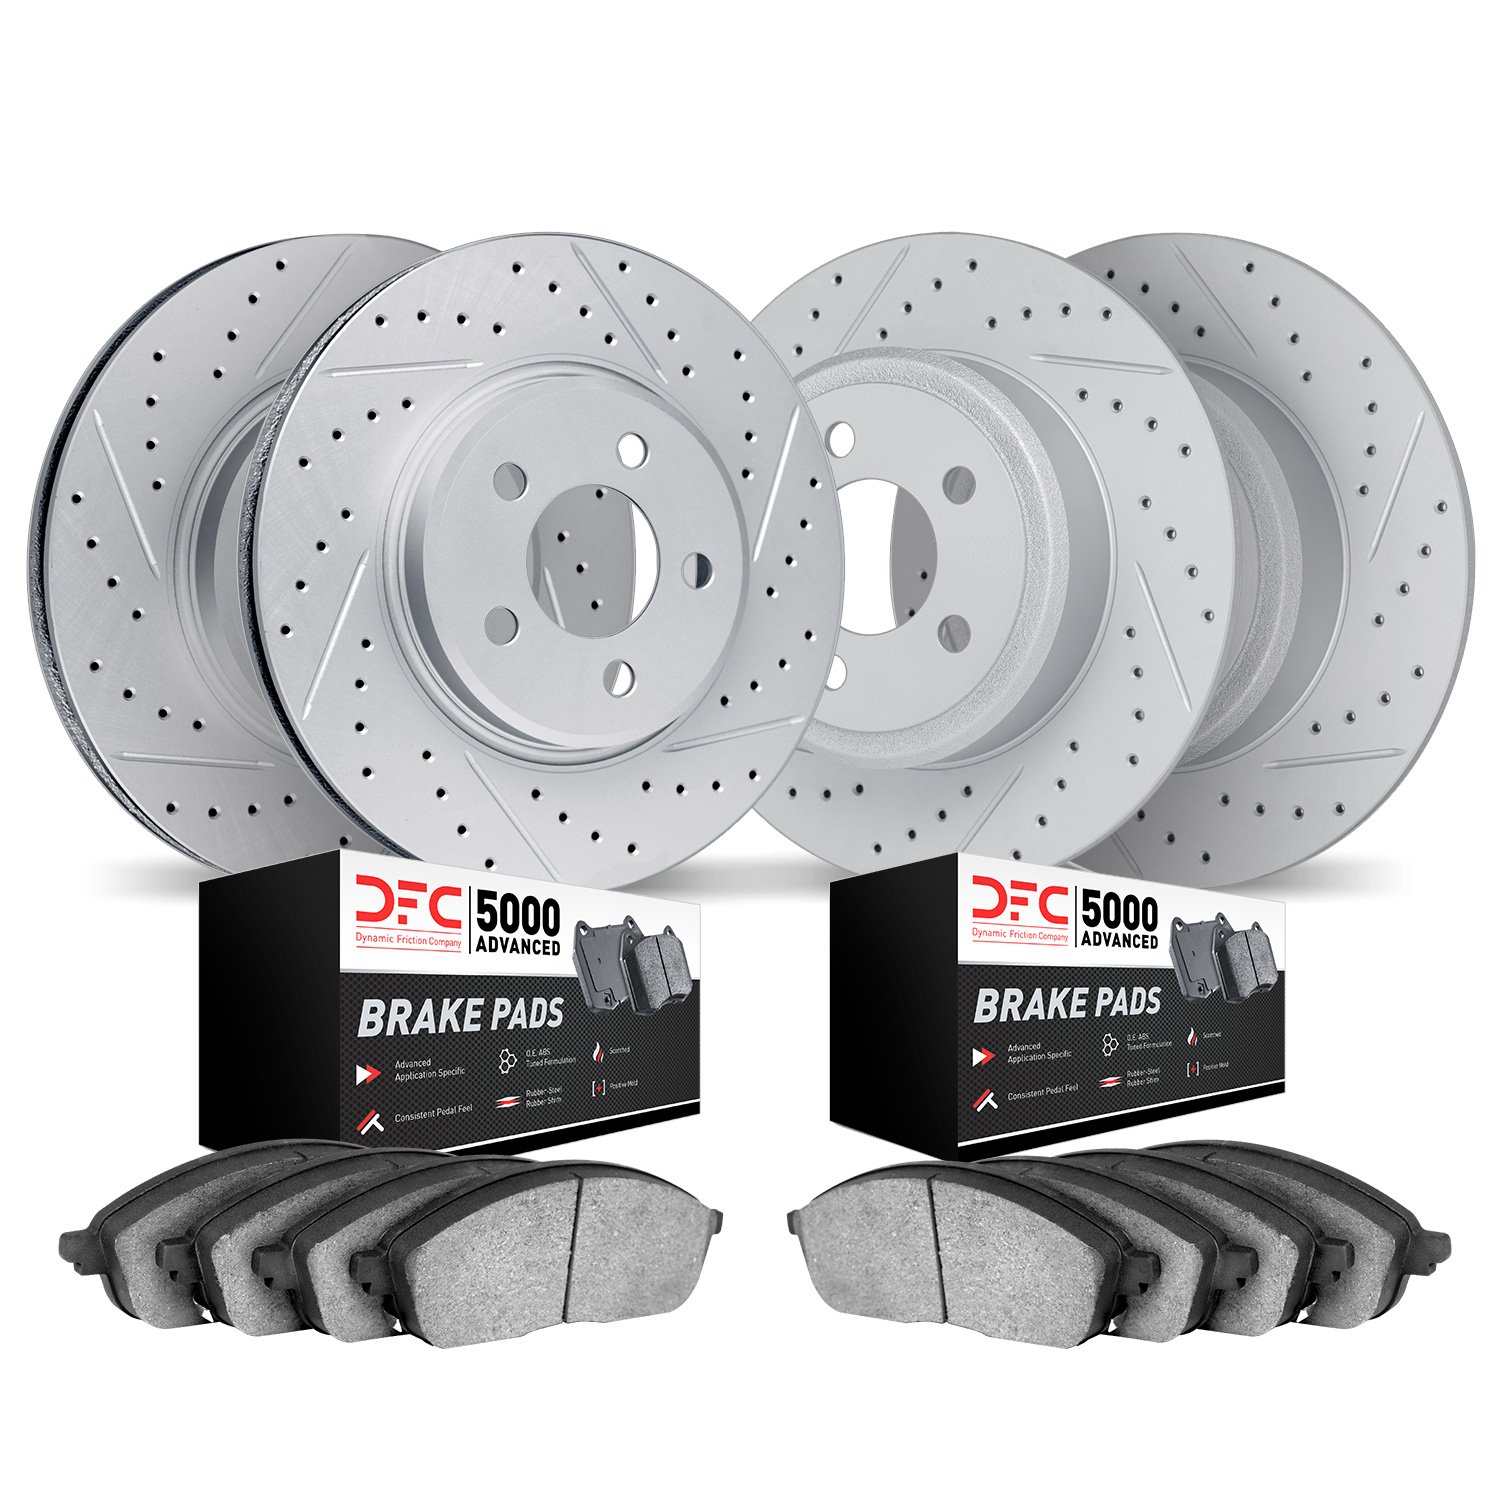 2504-59045 Geoperformance Drilled/Slotted Rotors w/5000 Advanced Brake Pads Kit, Fits Select Acura/Honda, Position: Front and Re